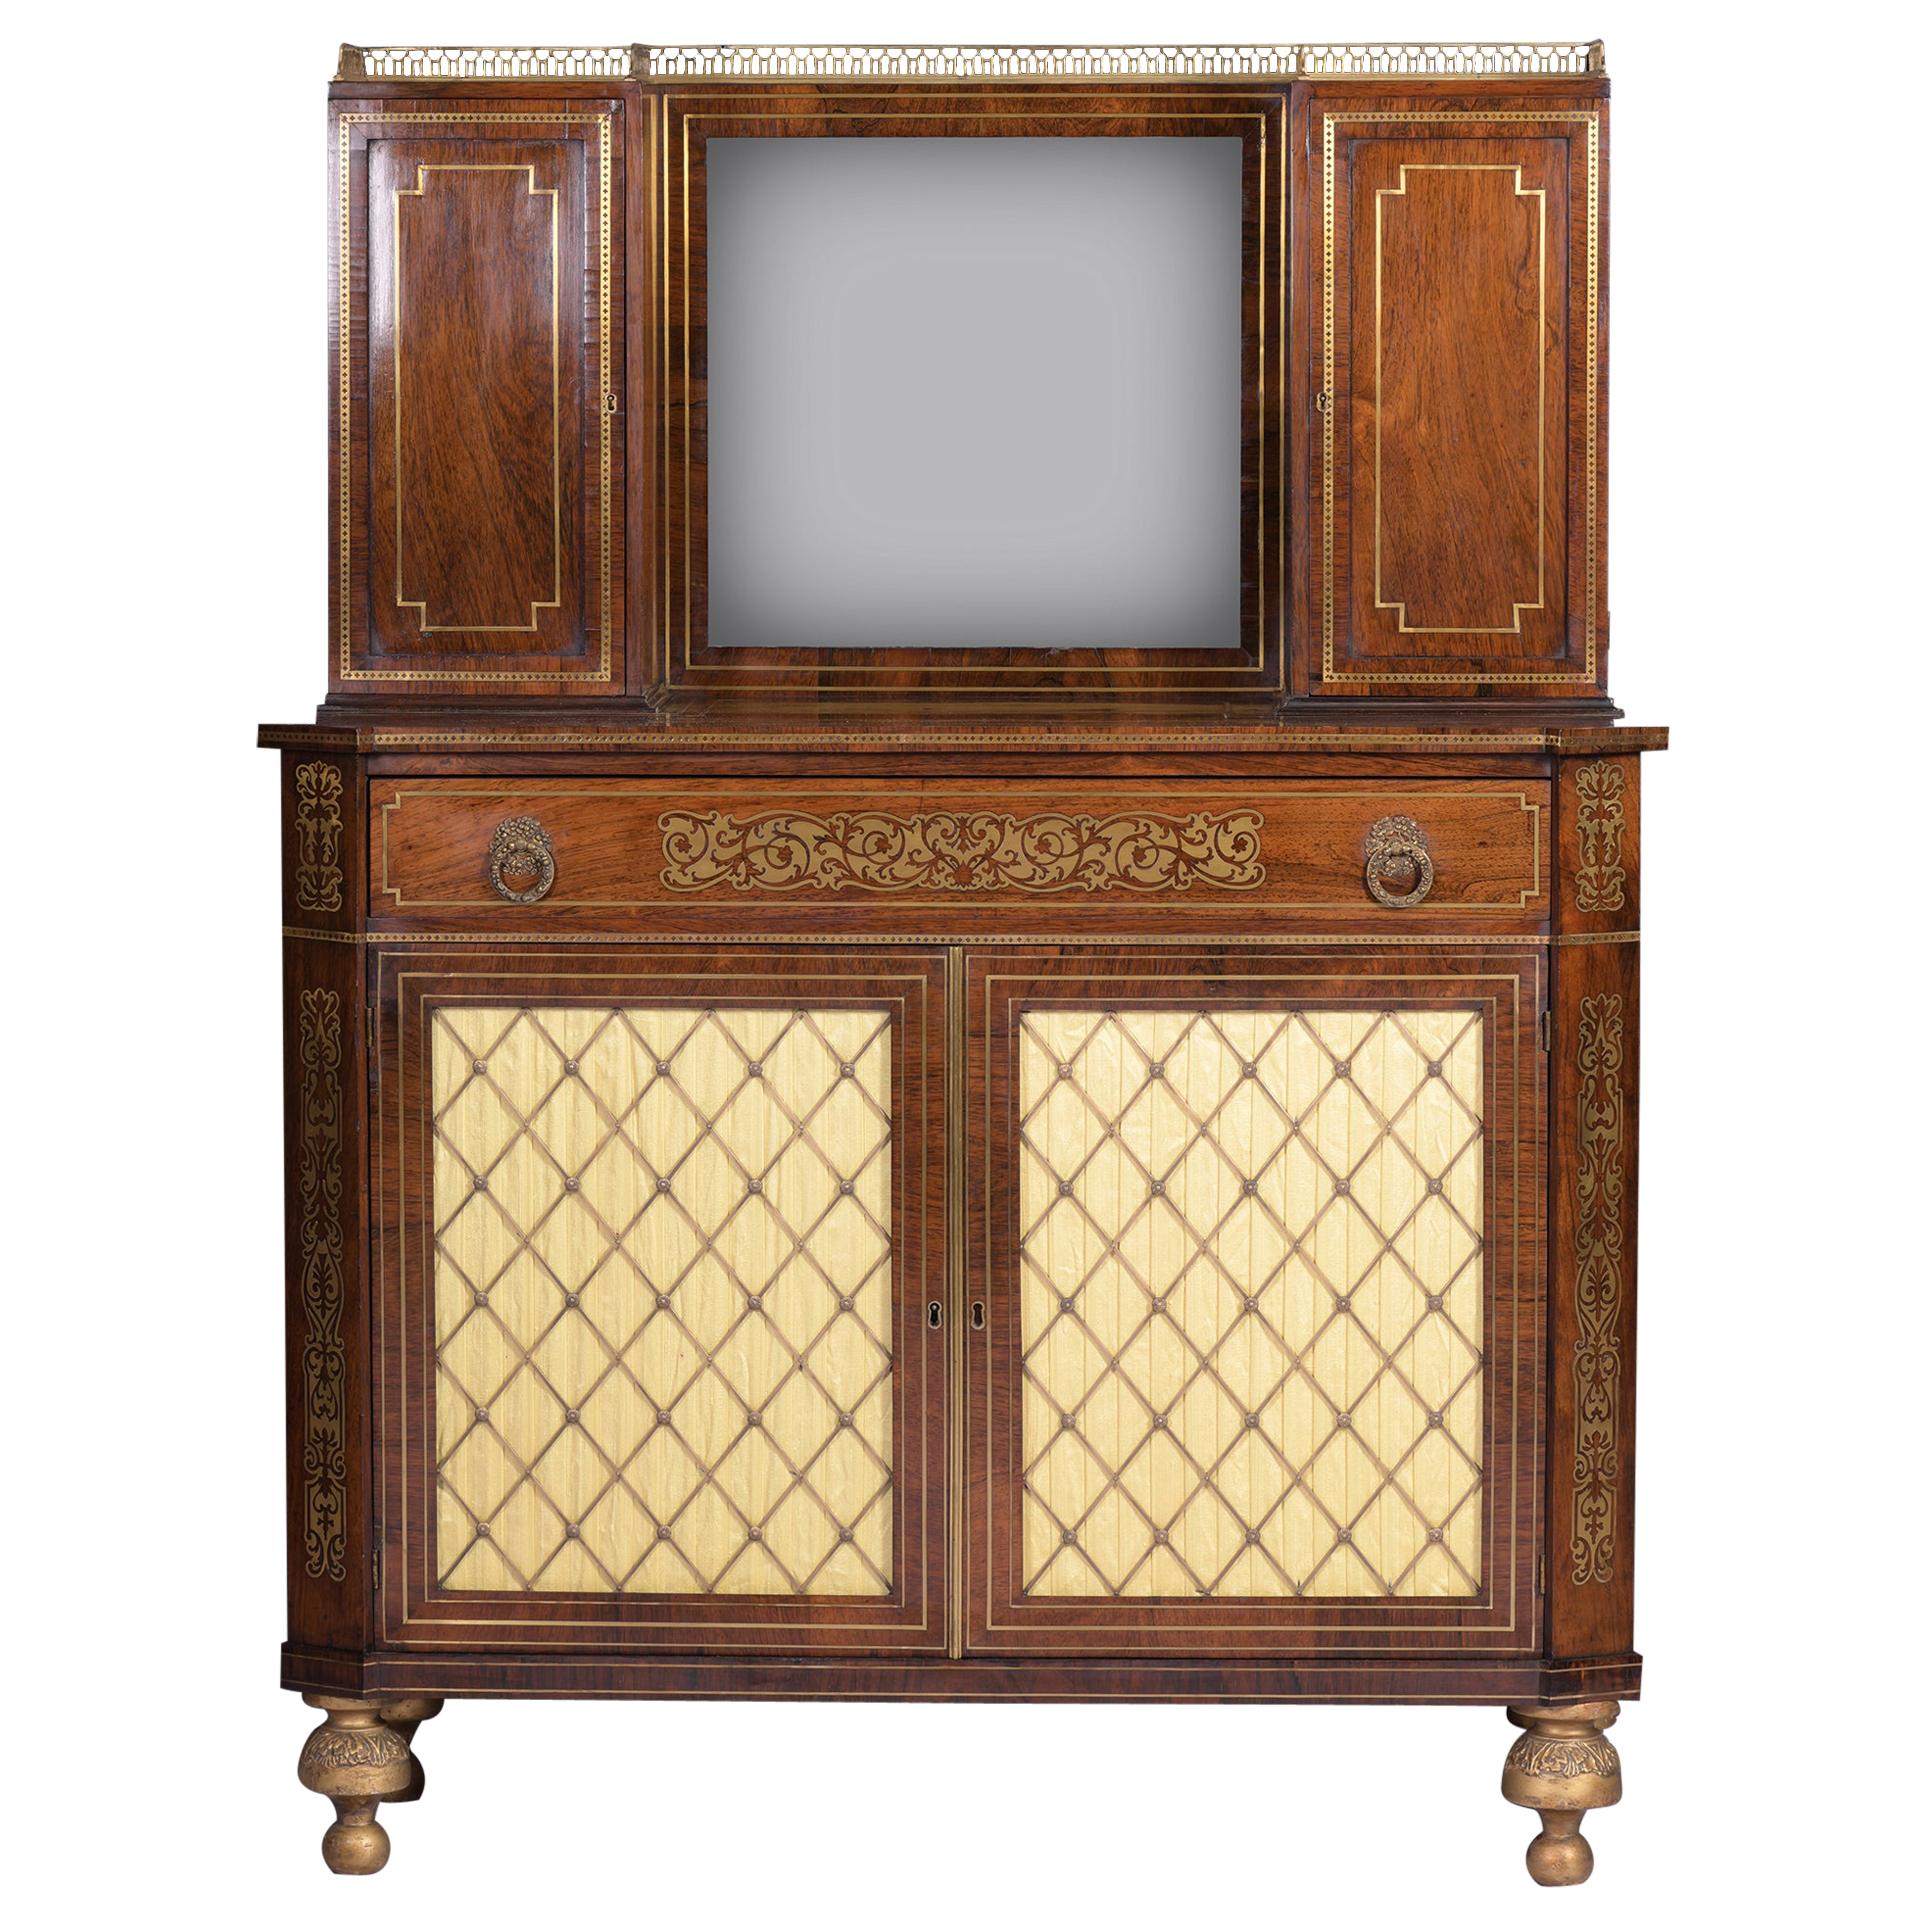 Early 19th Century English Regency Side Cabinet in the Manner of John Mclean